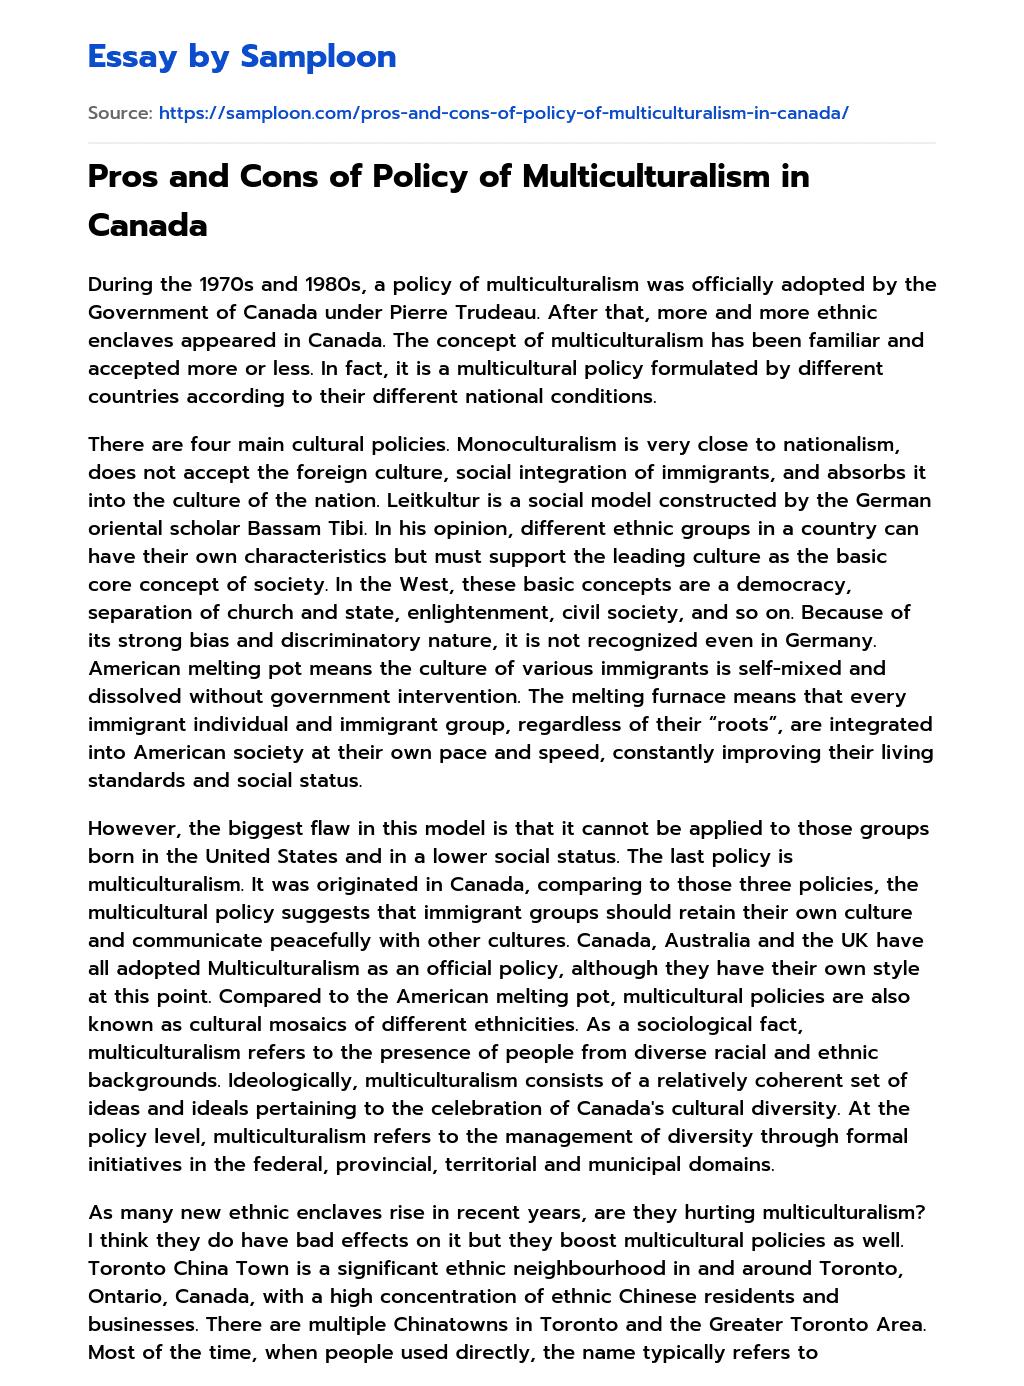 Pros and Cons of Policy of Multiculturalism in Canada essay